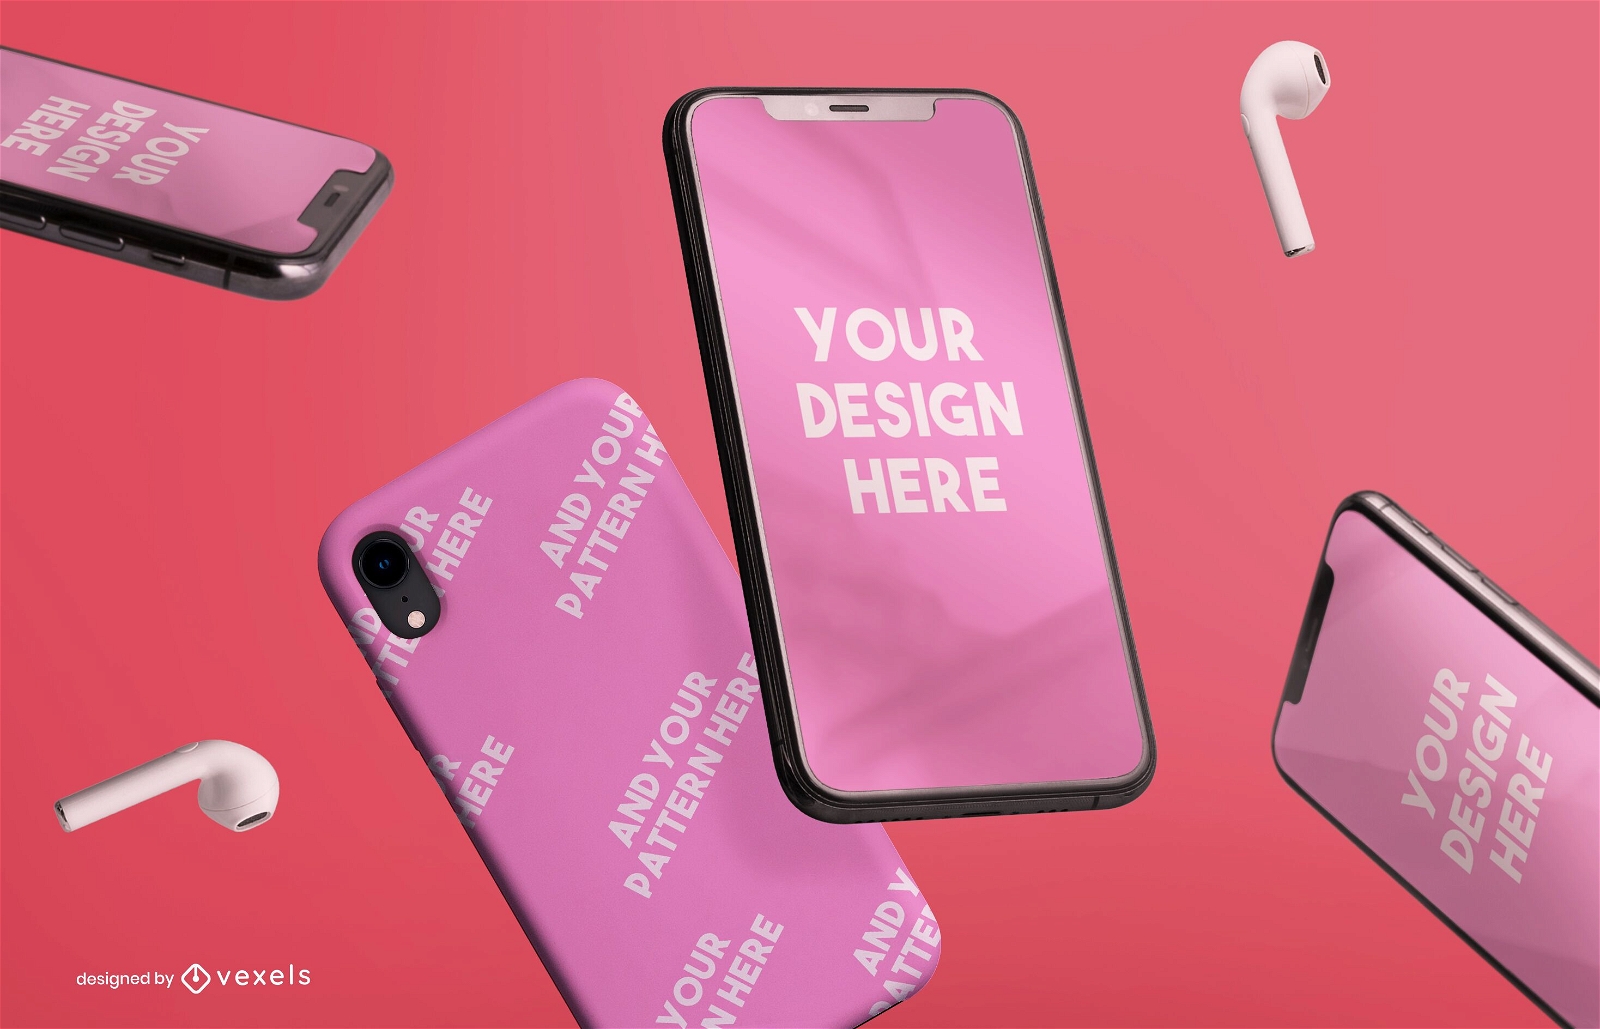 Iphones and phone case mockup composition